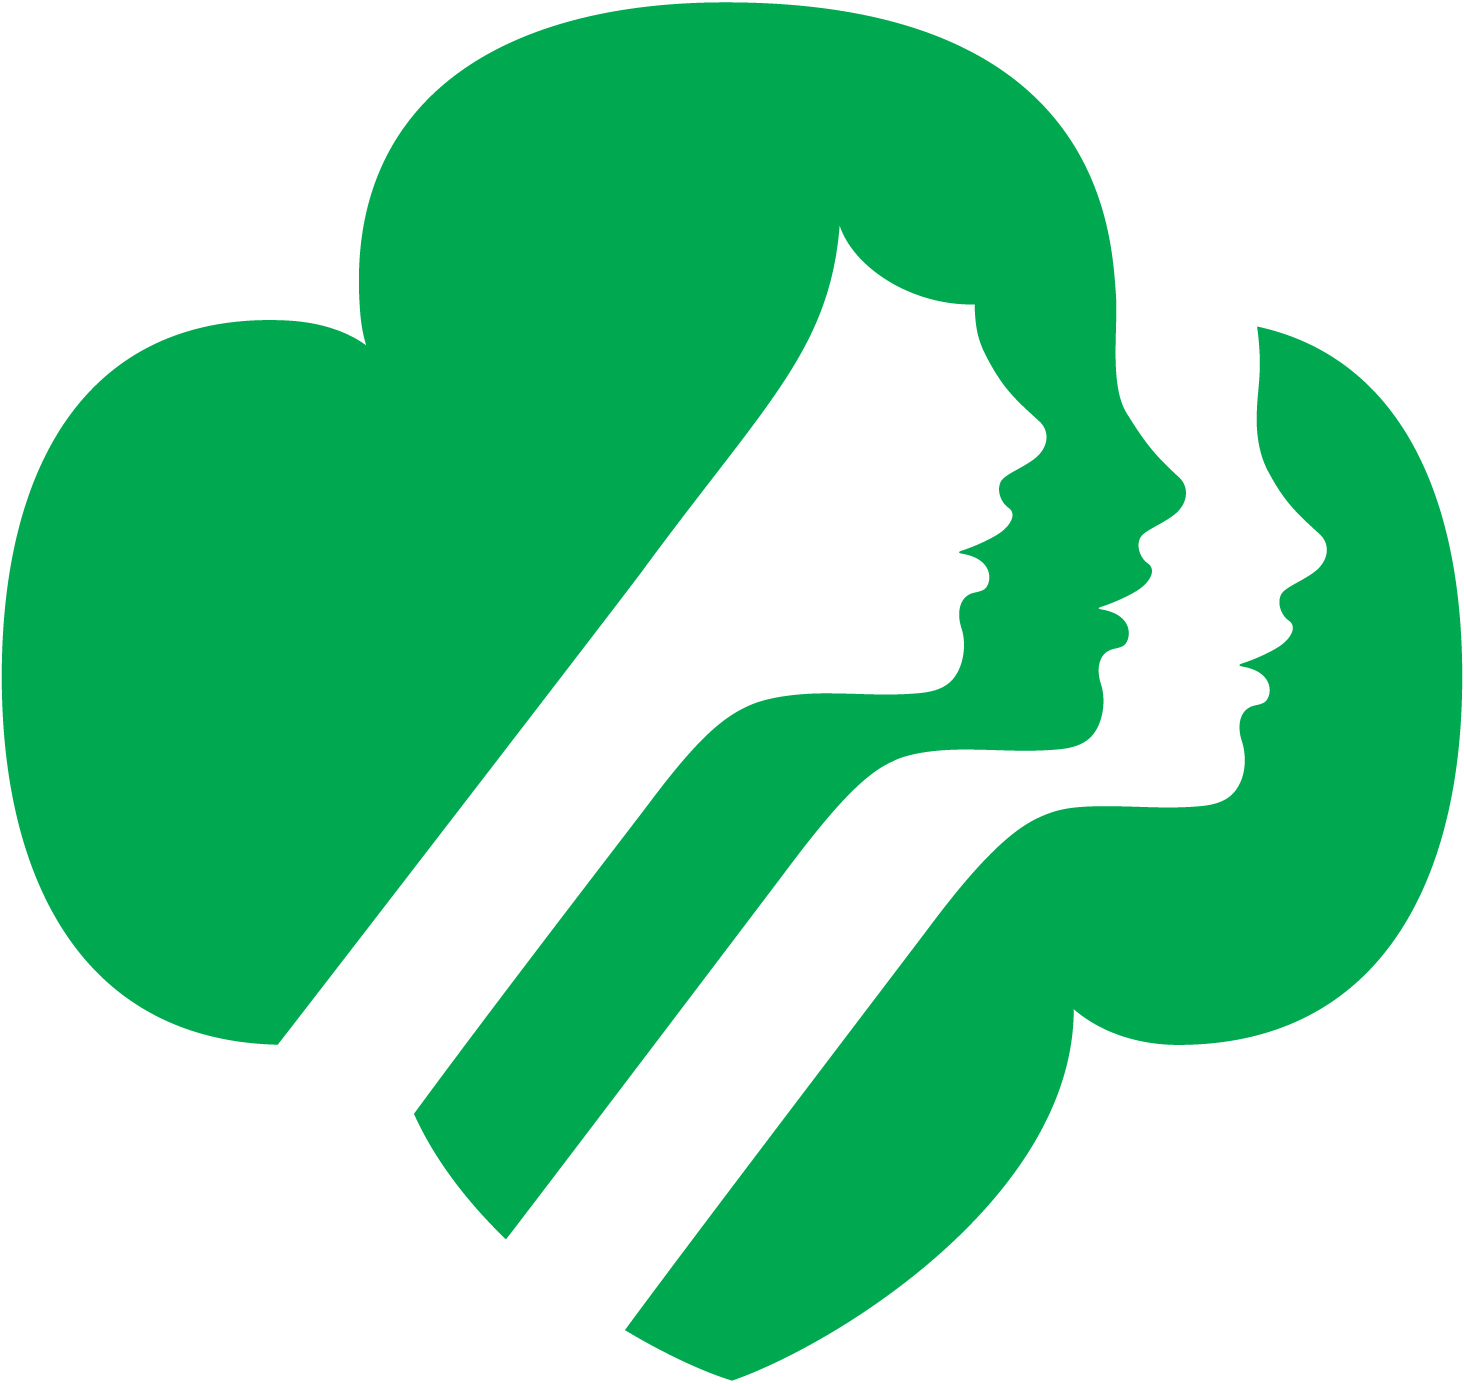 ... Free Girl Scout Clip Art;